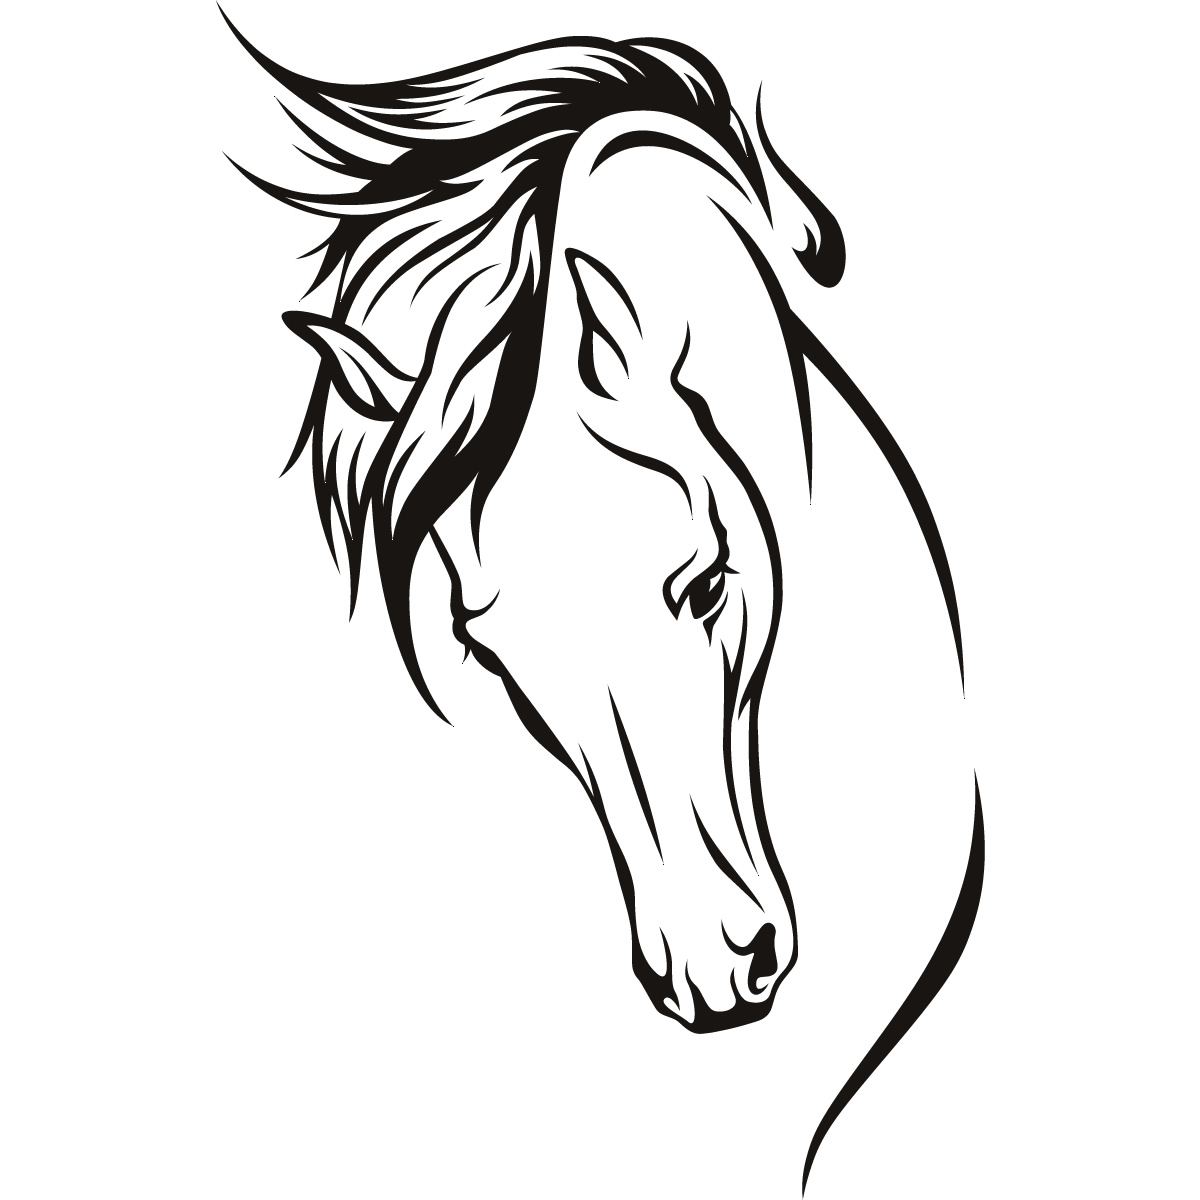 1000+ images about horse drawing or cut out